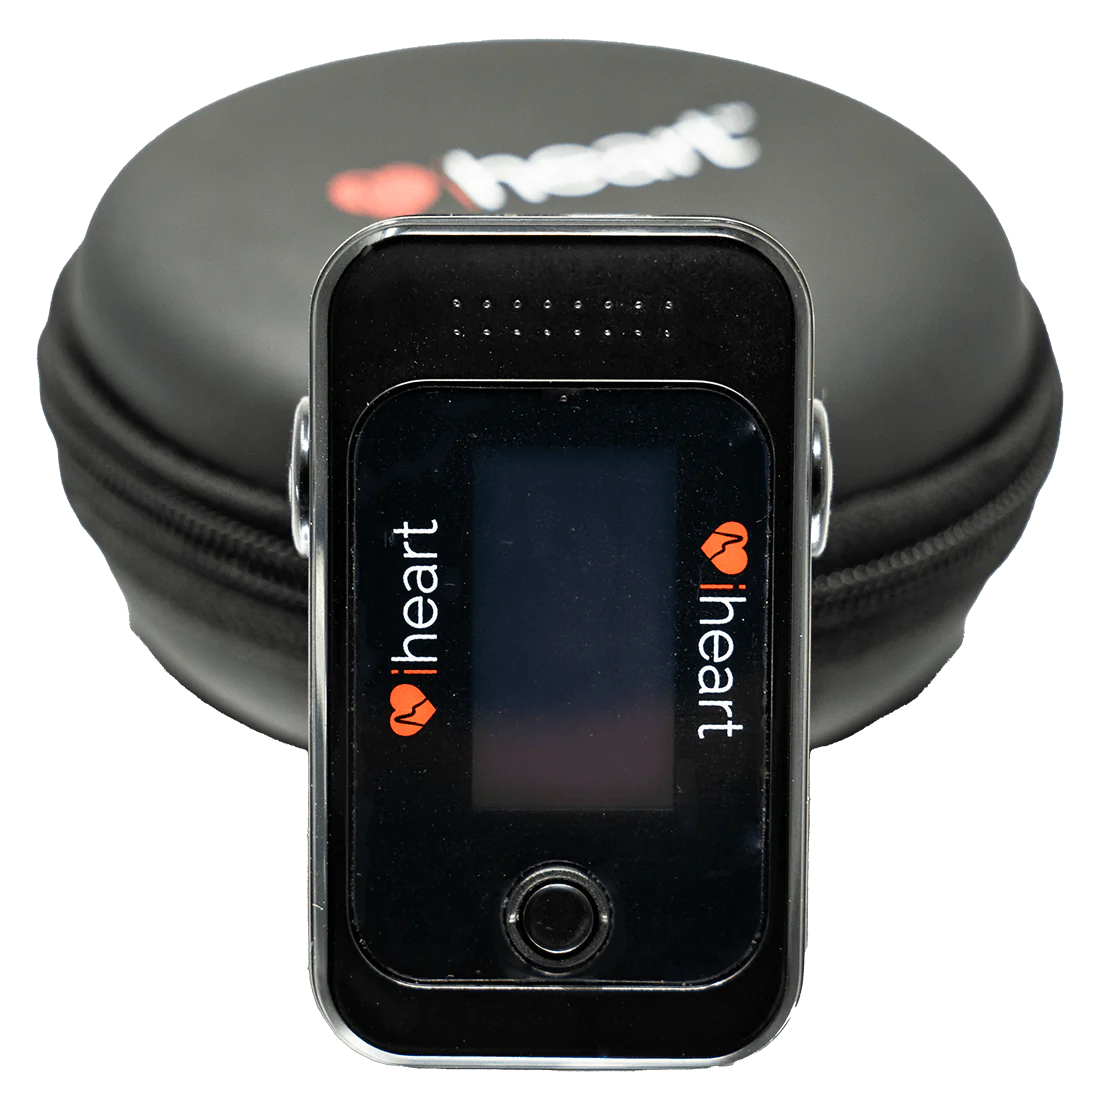 Front view of iHeart device with case